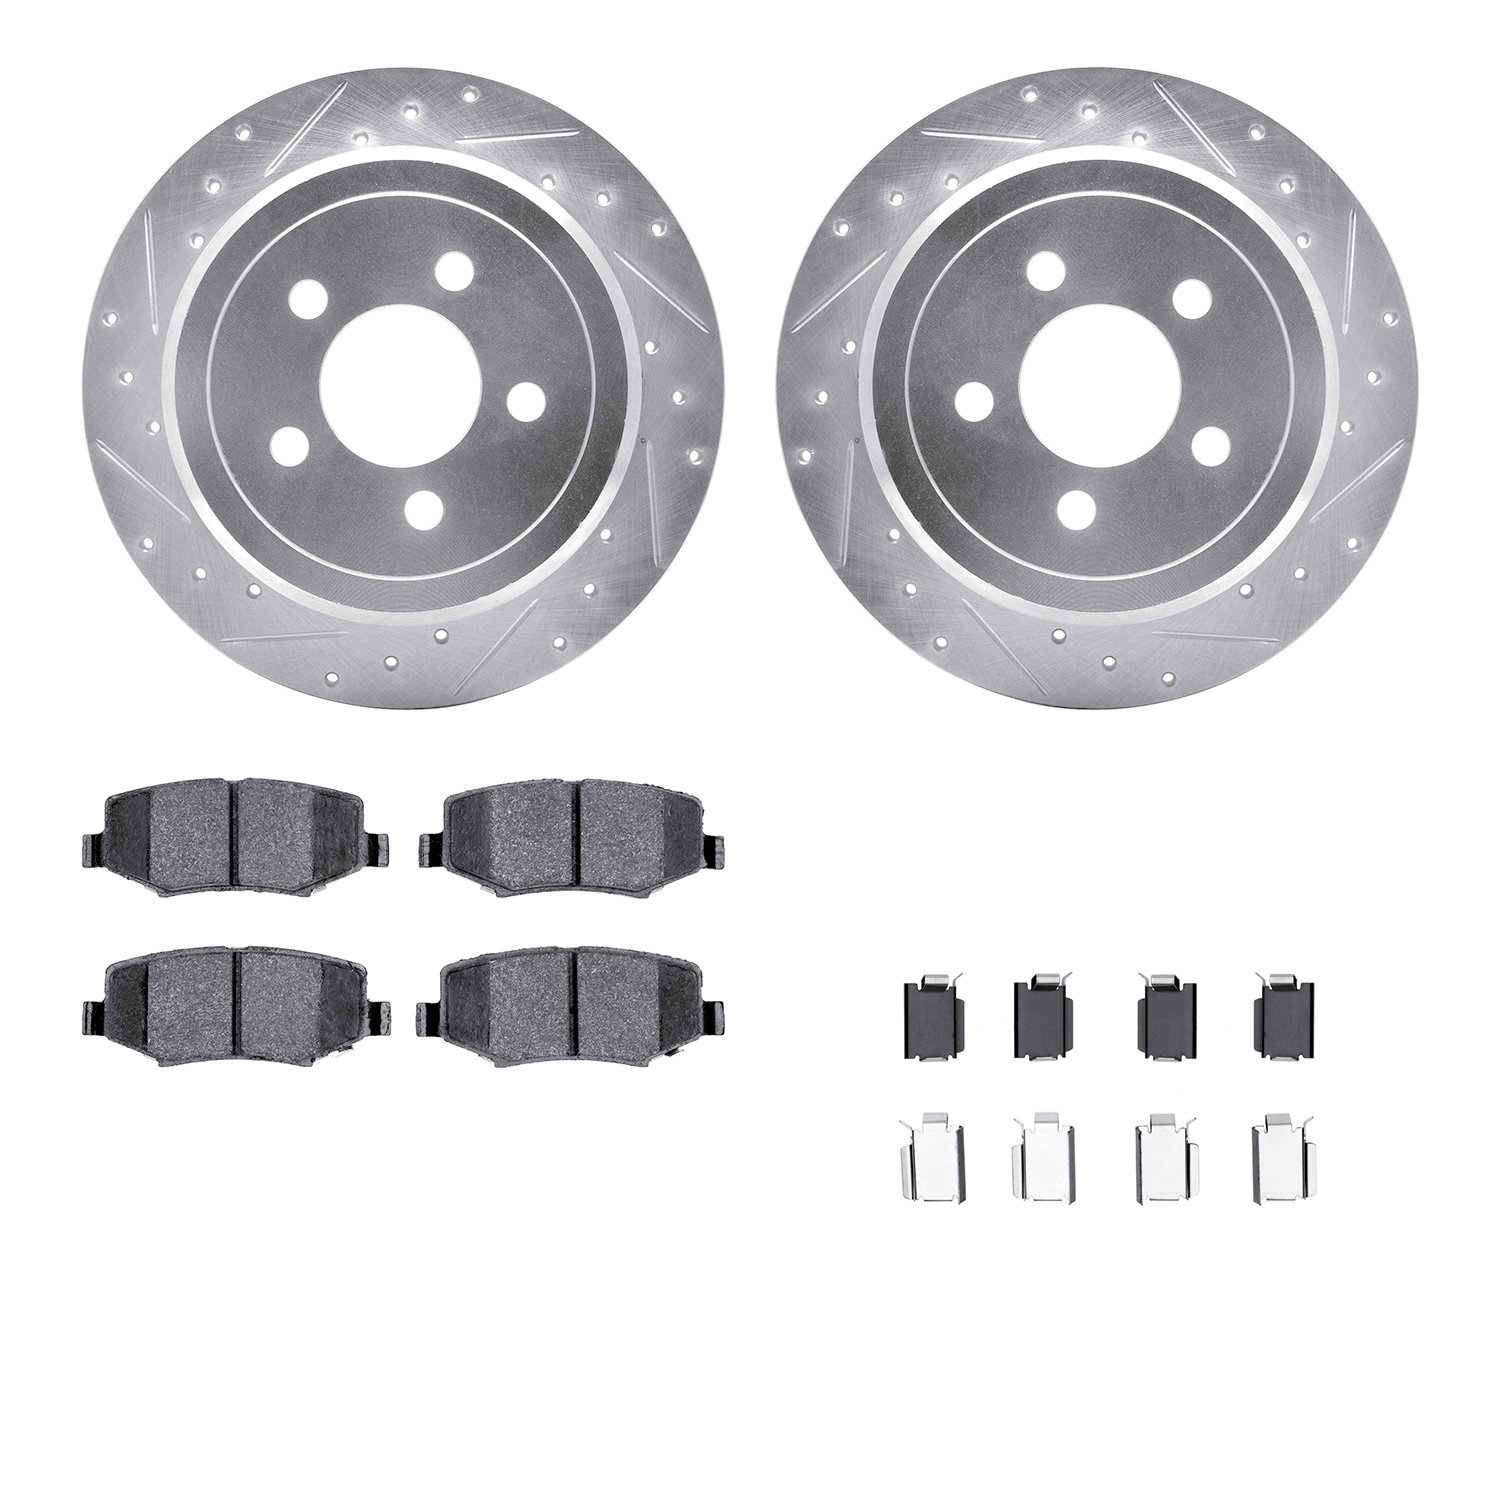 7412-42026 Drilled/Slotted Brake Rotors with Ultimate-Duty Brake Pads Kit & Hardware [Silver], 2007-2012 Mopar, Position: Rear